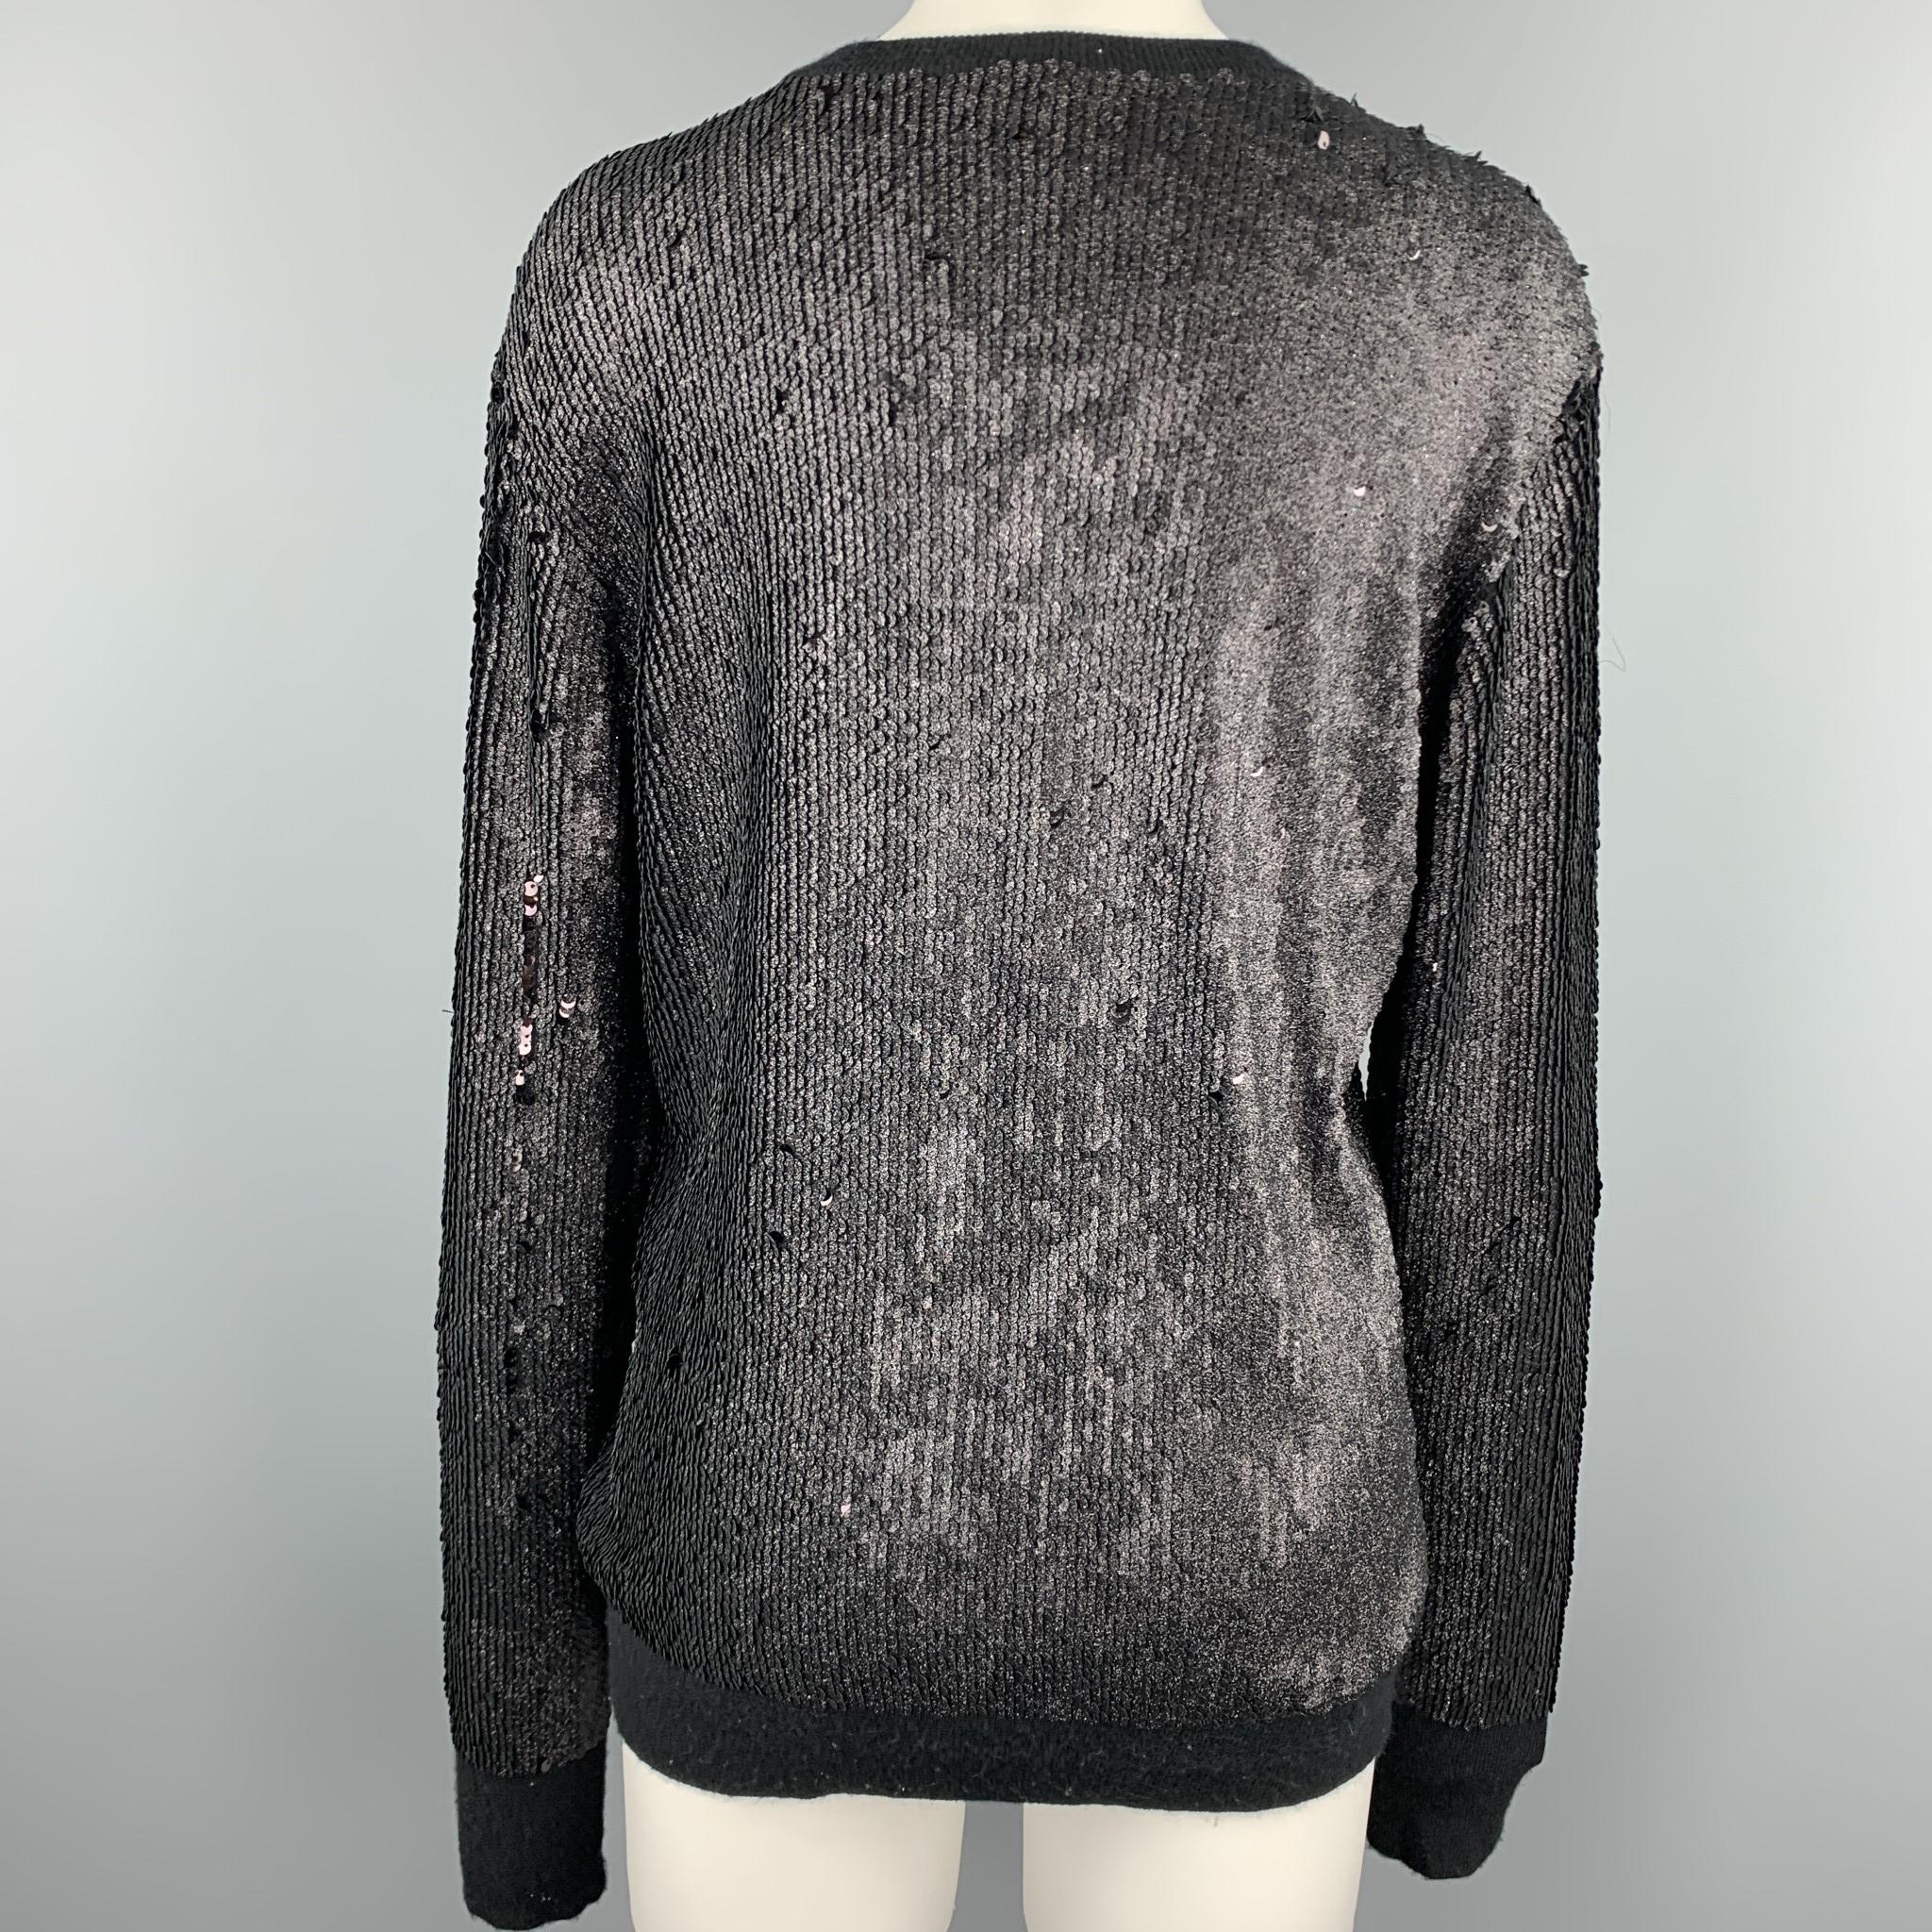 Women's EQUIPMENT Size S Black Sparkle Sequined Knit Crew Neck Pullover